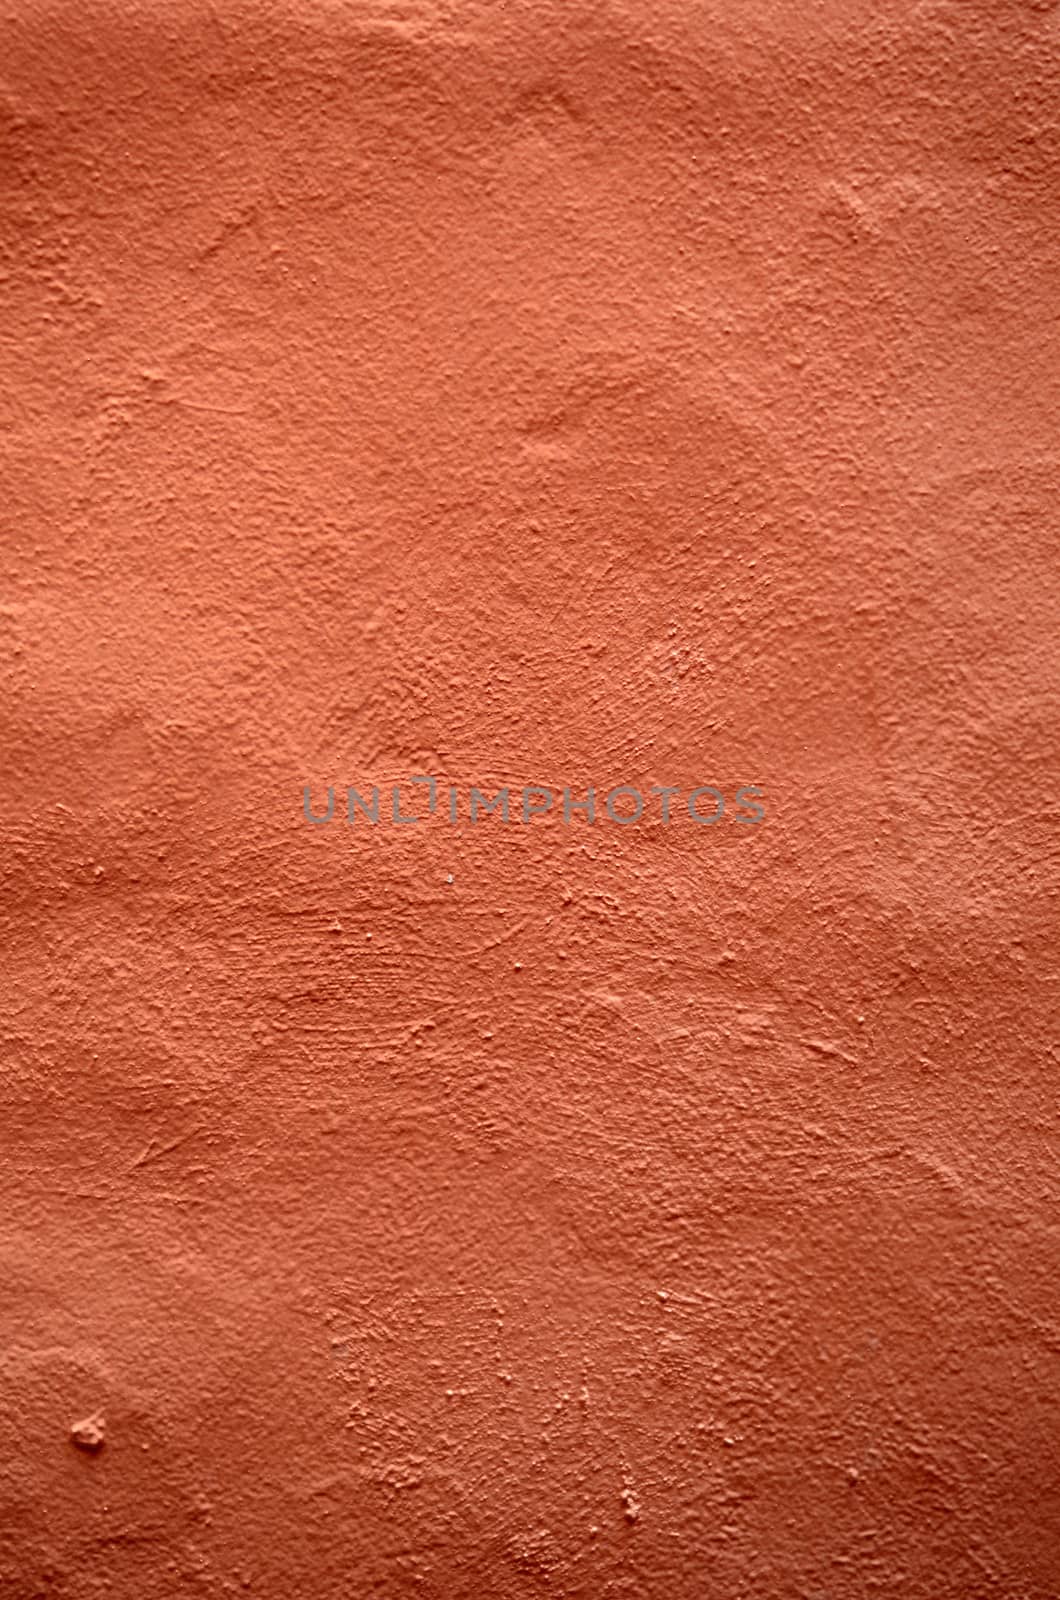 Abstract Background Texture of Grungy, Pink Terracotta Stucco Render Plaster